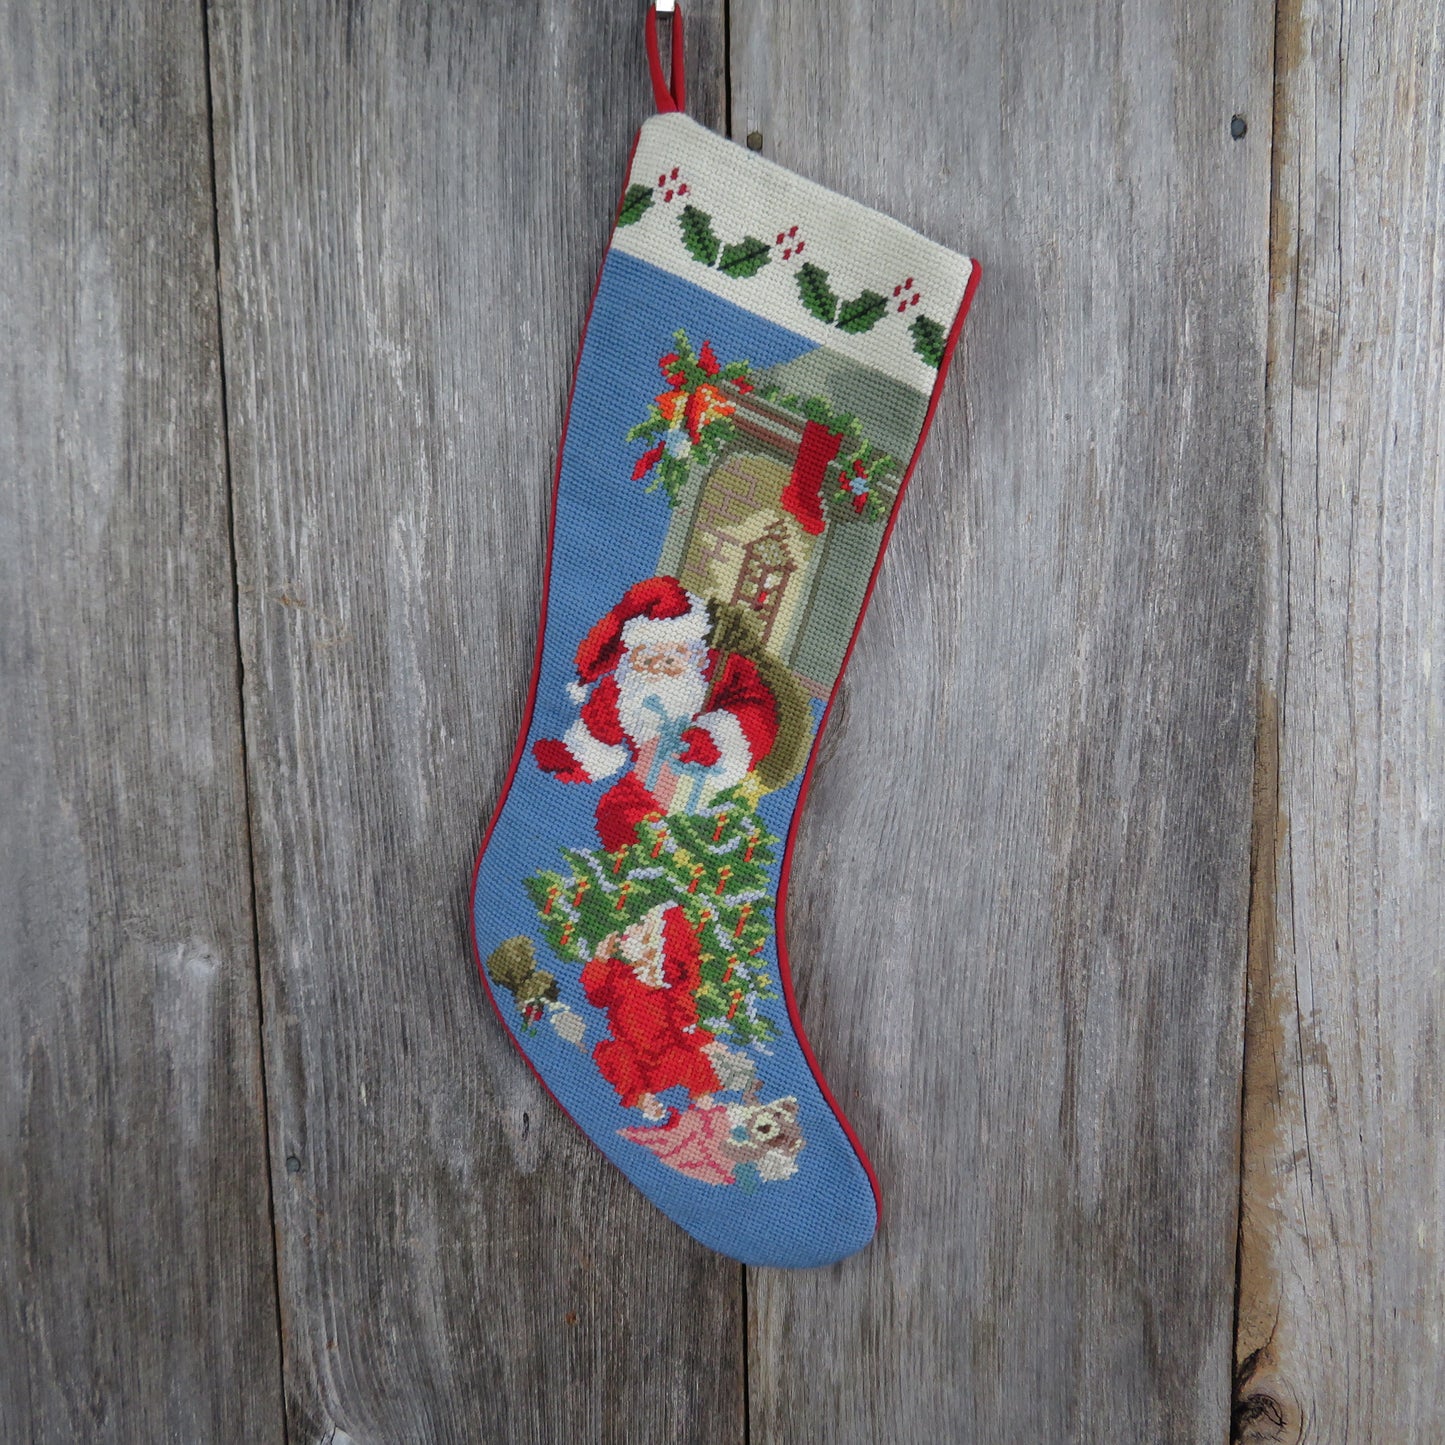 Wool Santa Stocking Embroidered Christmas Tree Delivering Gifts Woven Blue Red Holiday Decor - At Grandma's Table